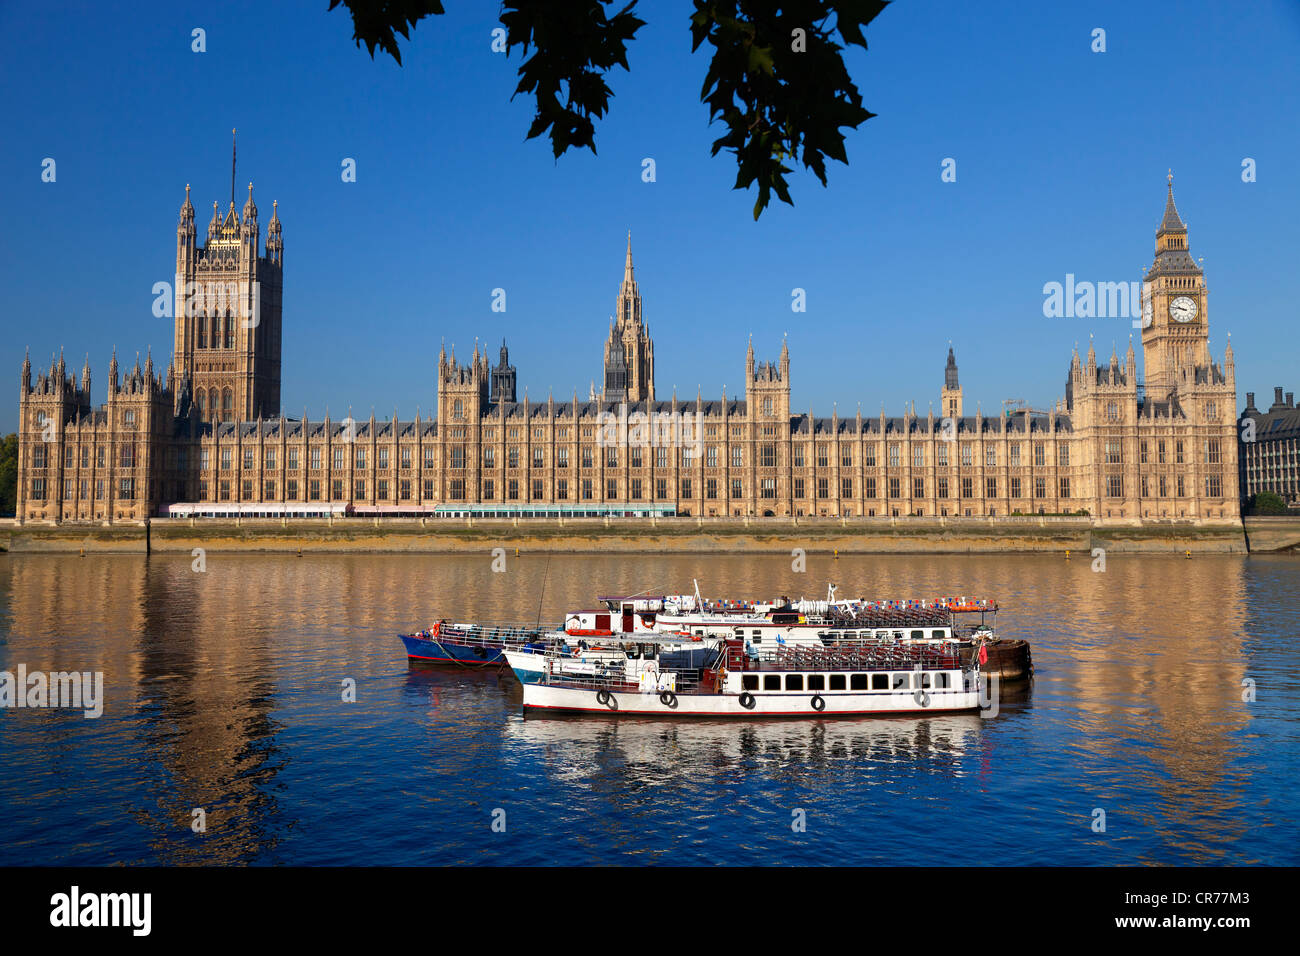 Der Palace of Westminster, Sommermorgen früh Stockfoto